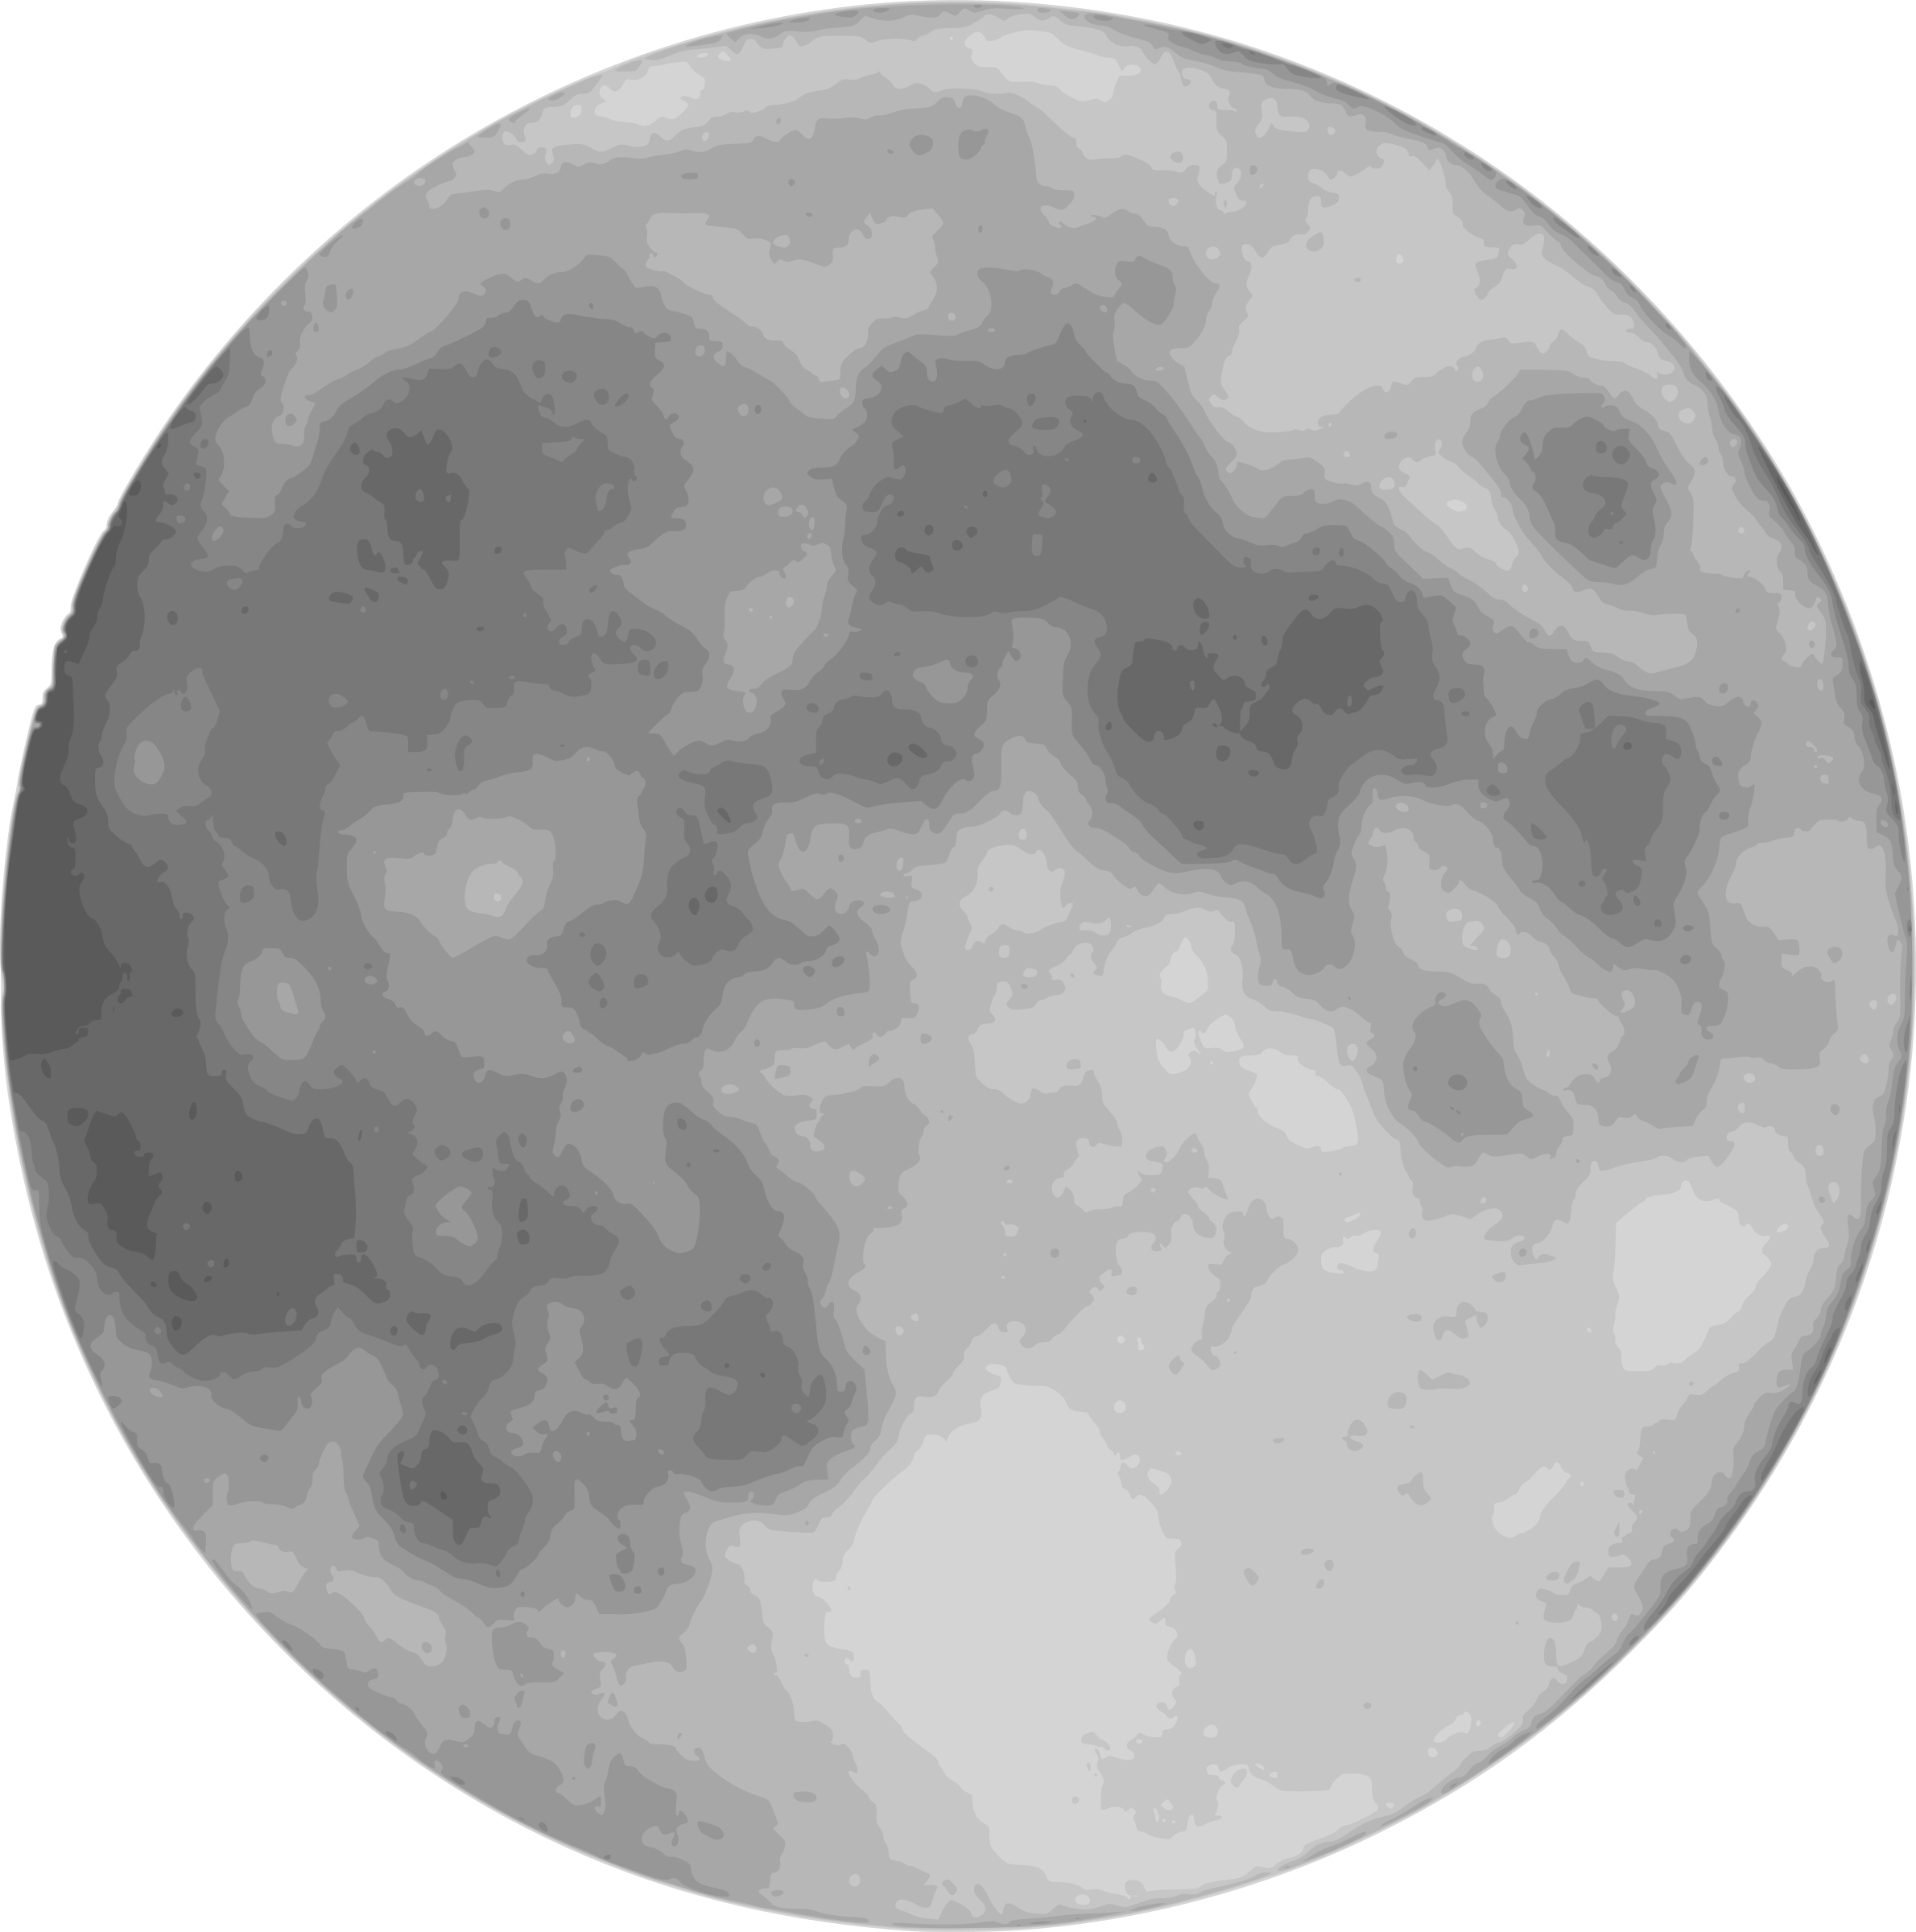 Full moon Halloween Clip art - Moon PNG png download - 2380*2400 - Free